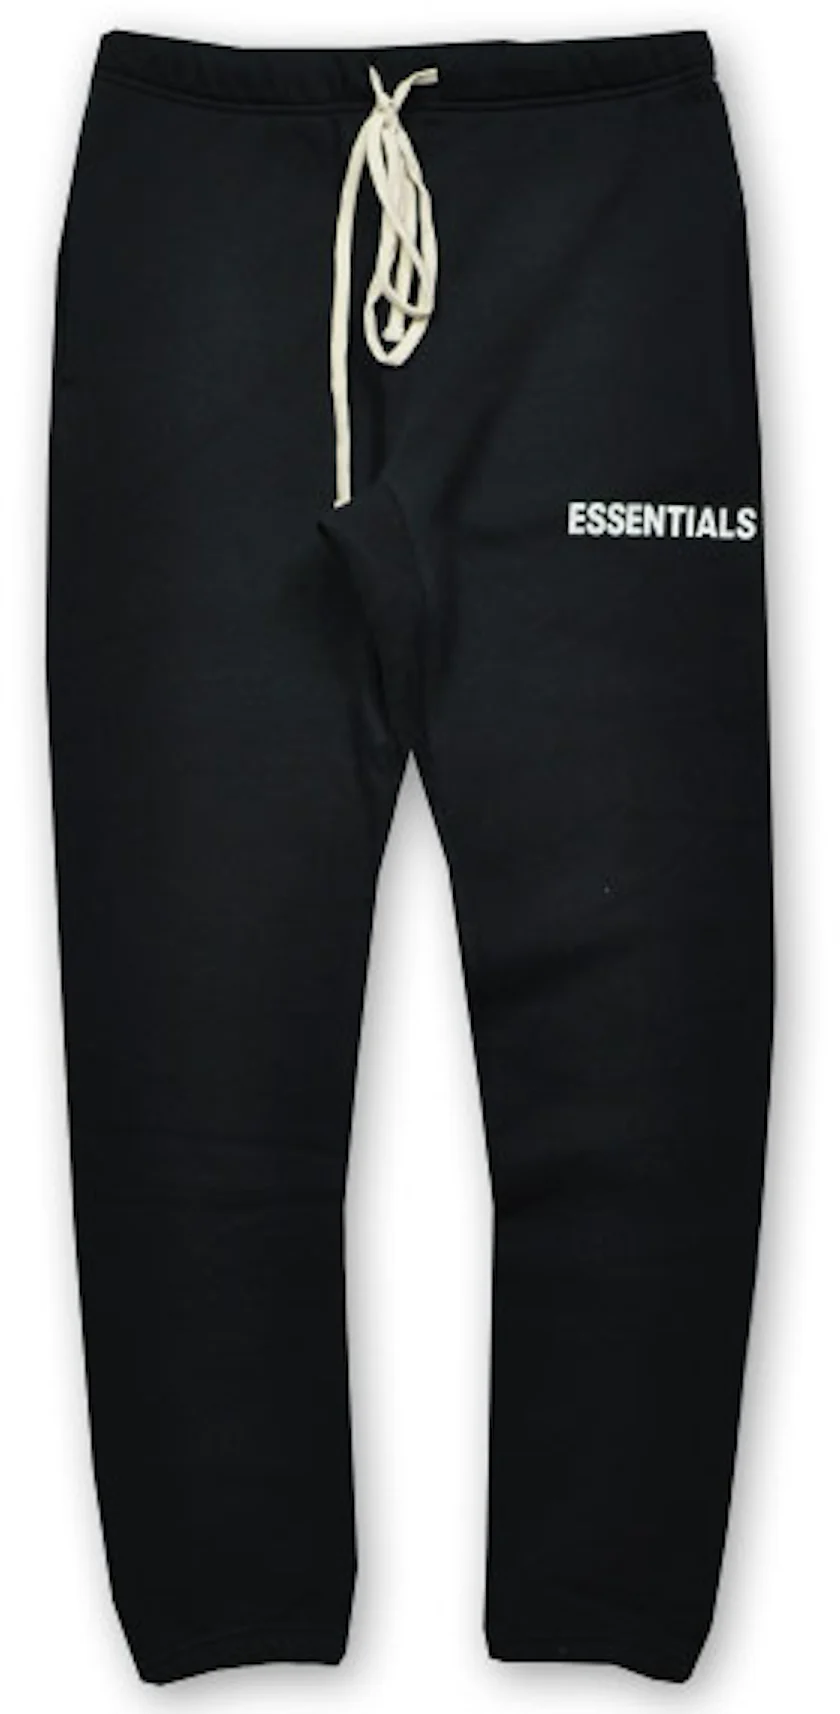 Fear Of God Essentials Sweatpants Black (SS21) – What's Your Size UK